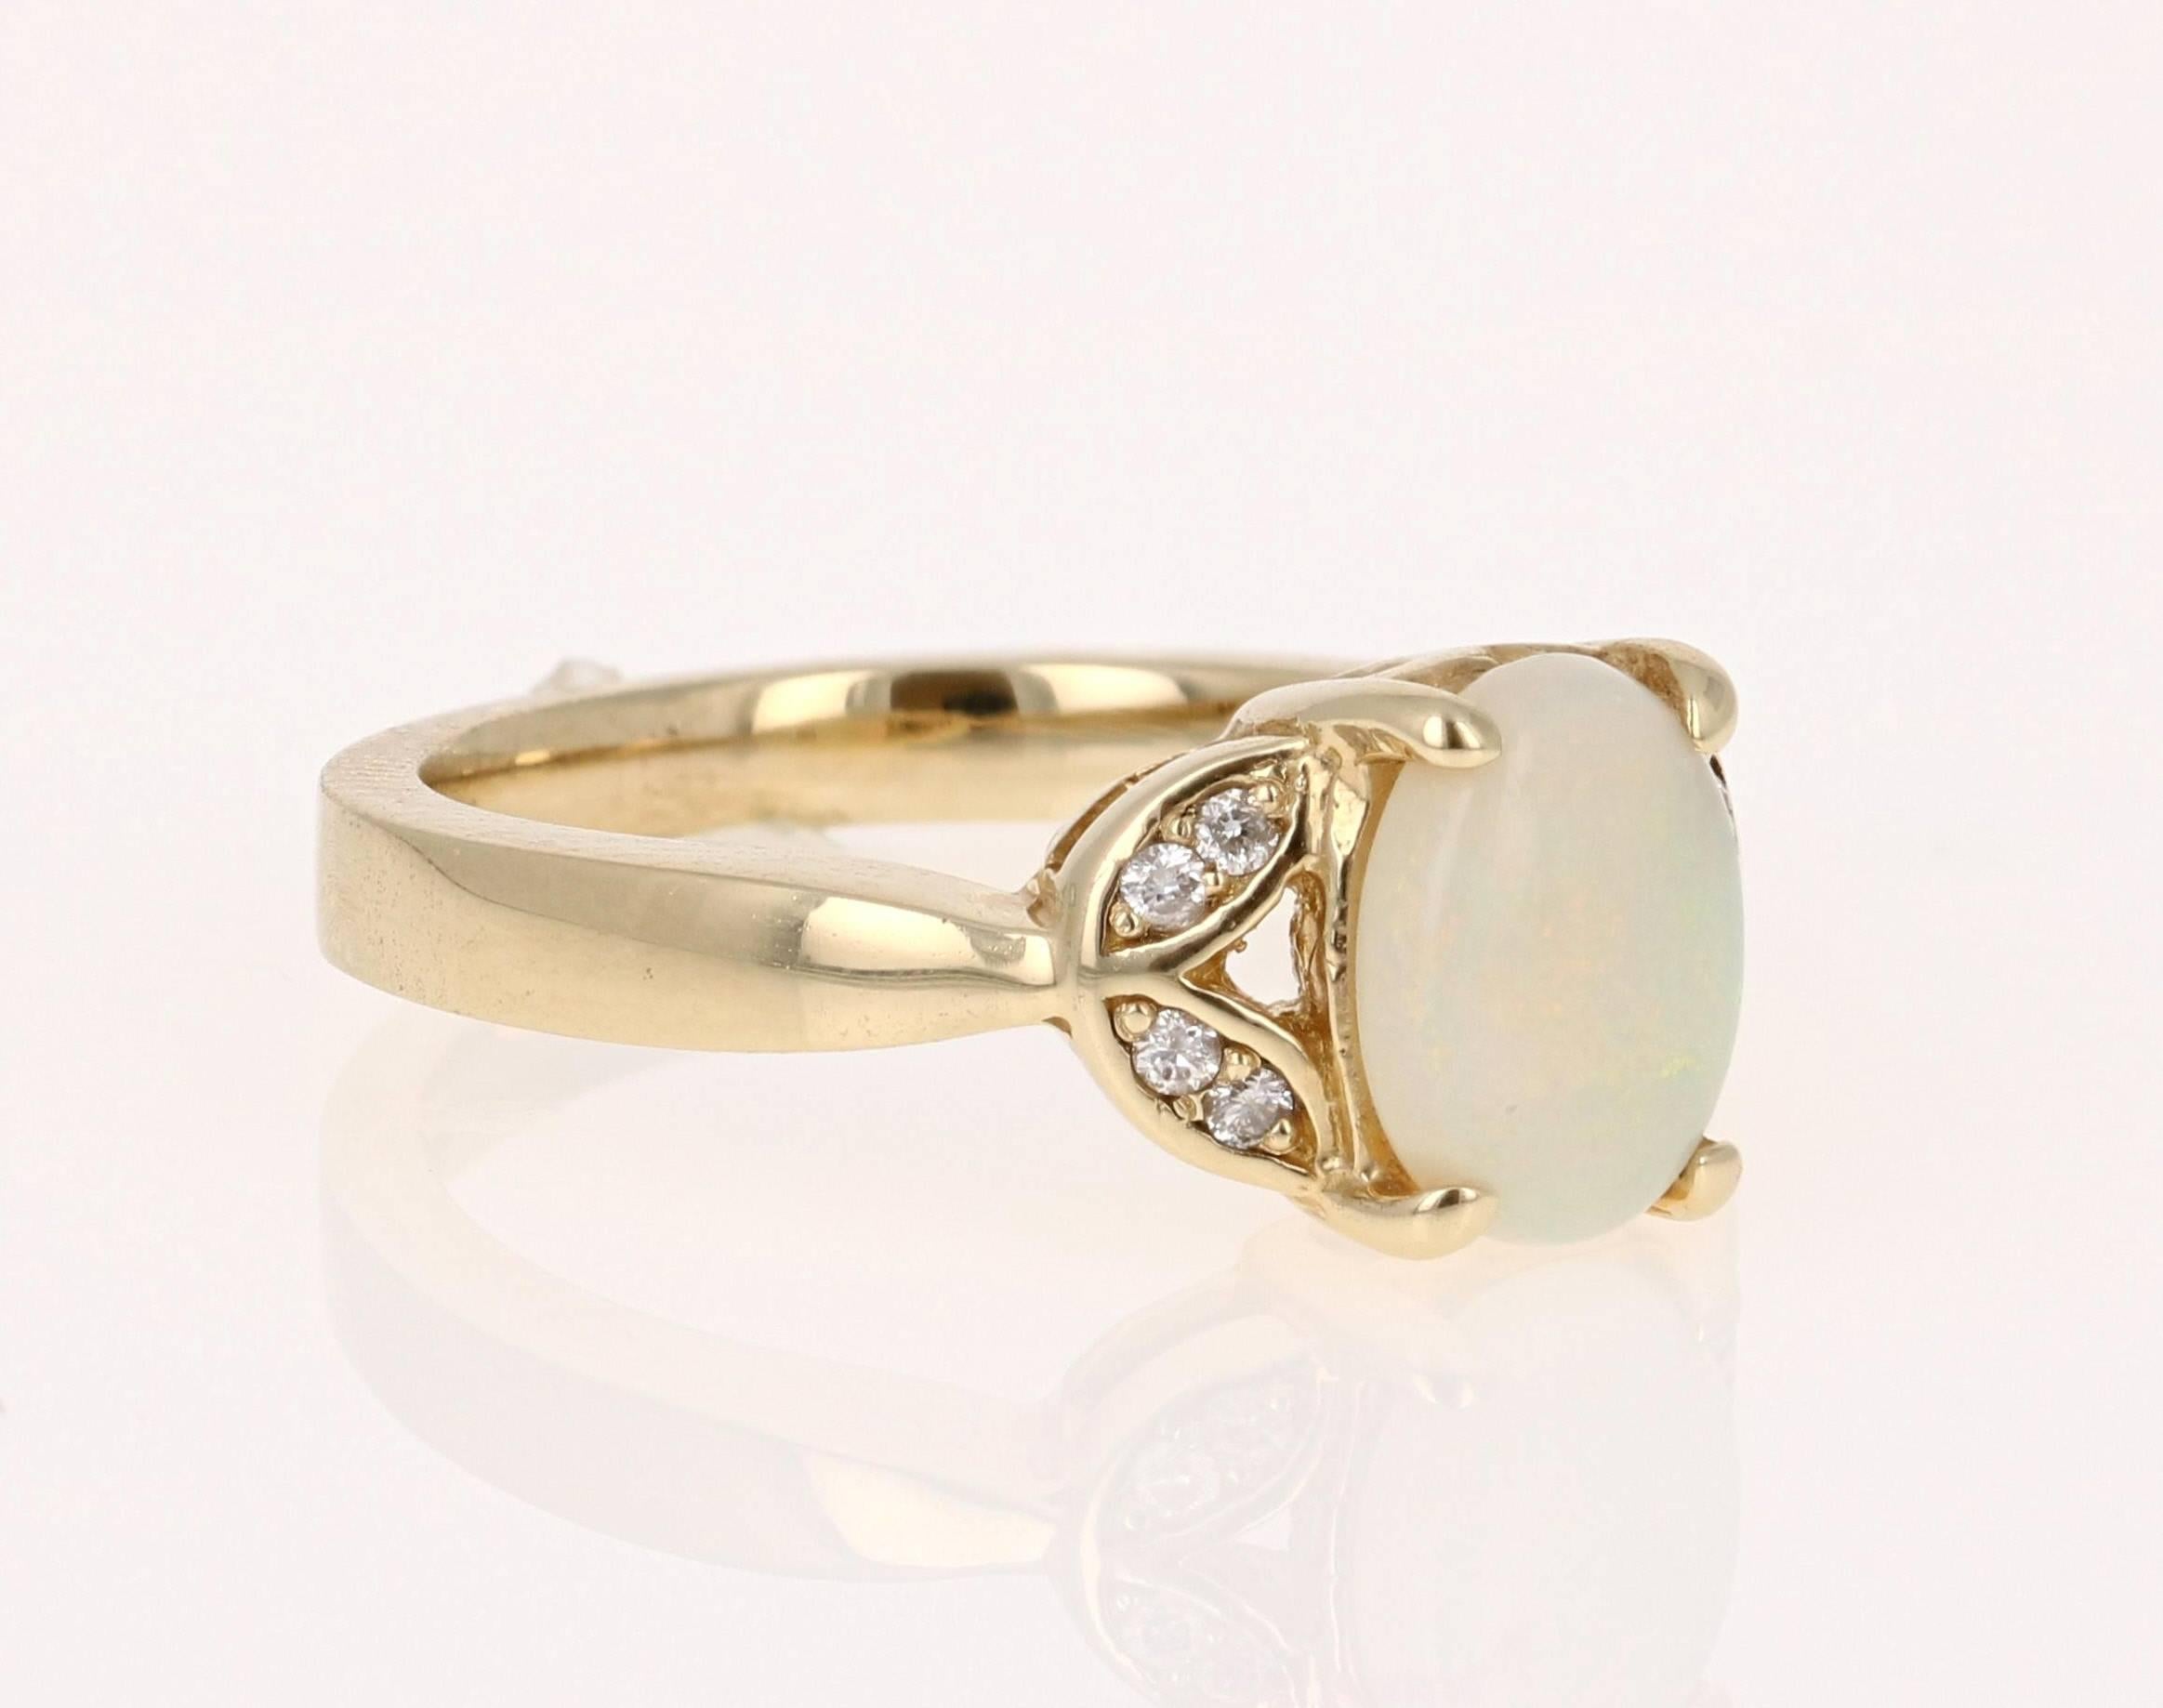 Delicate and dainty Opal and Diamond Ring in 14K Yellow Gold.  The Opal in this ring weighs 0.98 carats and is surrounded by 8 Round Cut Diamonds that weigh 0.08 carat.  The total carat weight of this ring is 1.06 carats.  The ring is a size 6.75